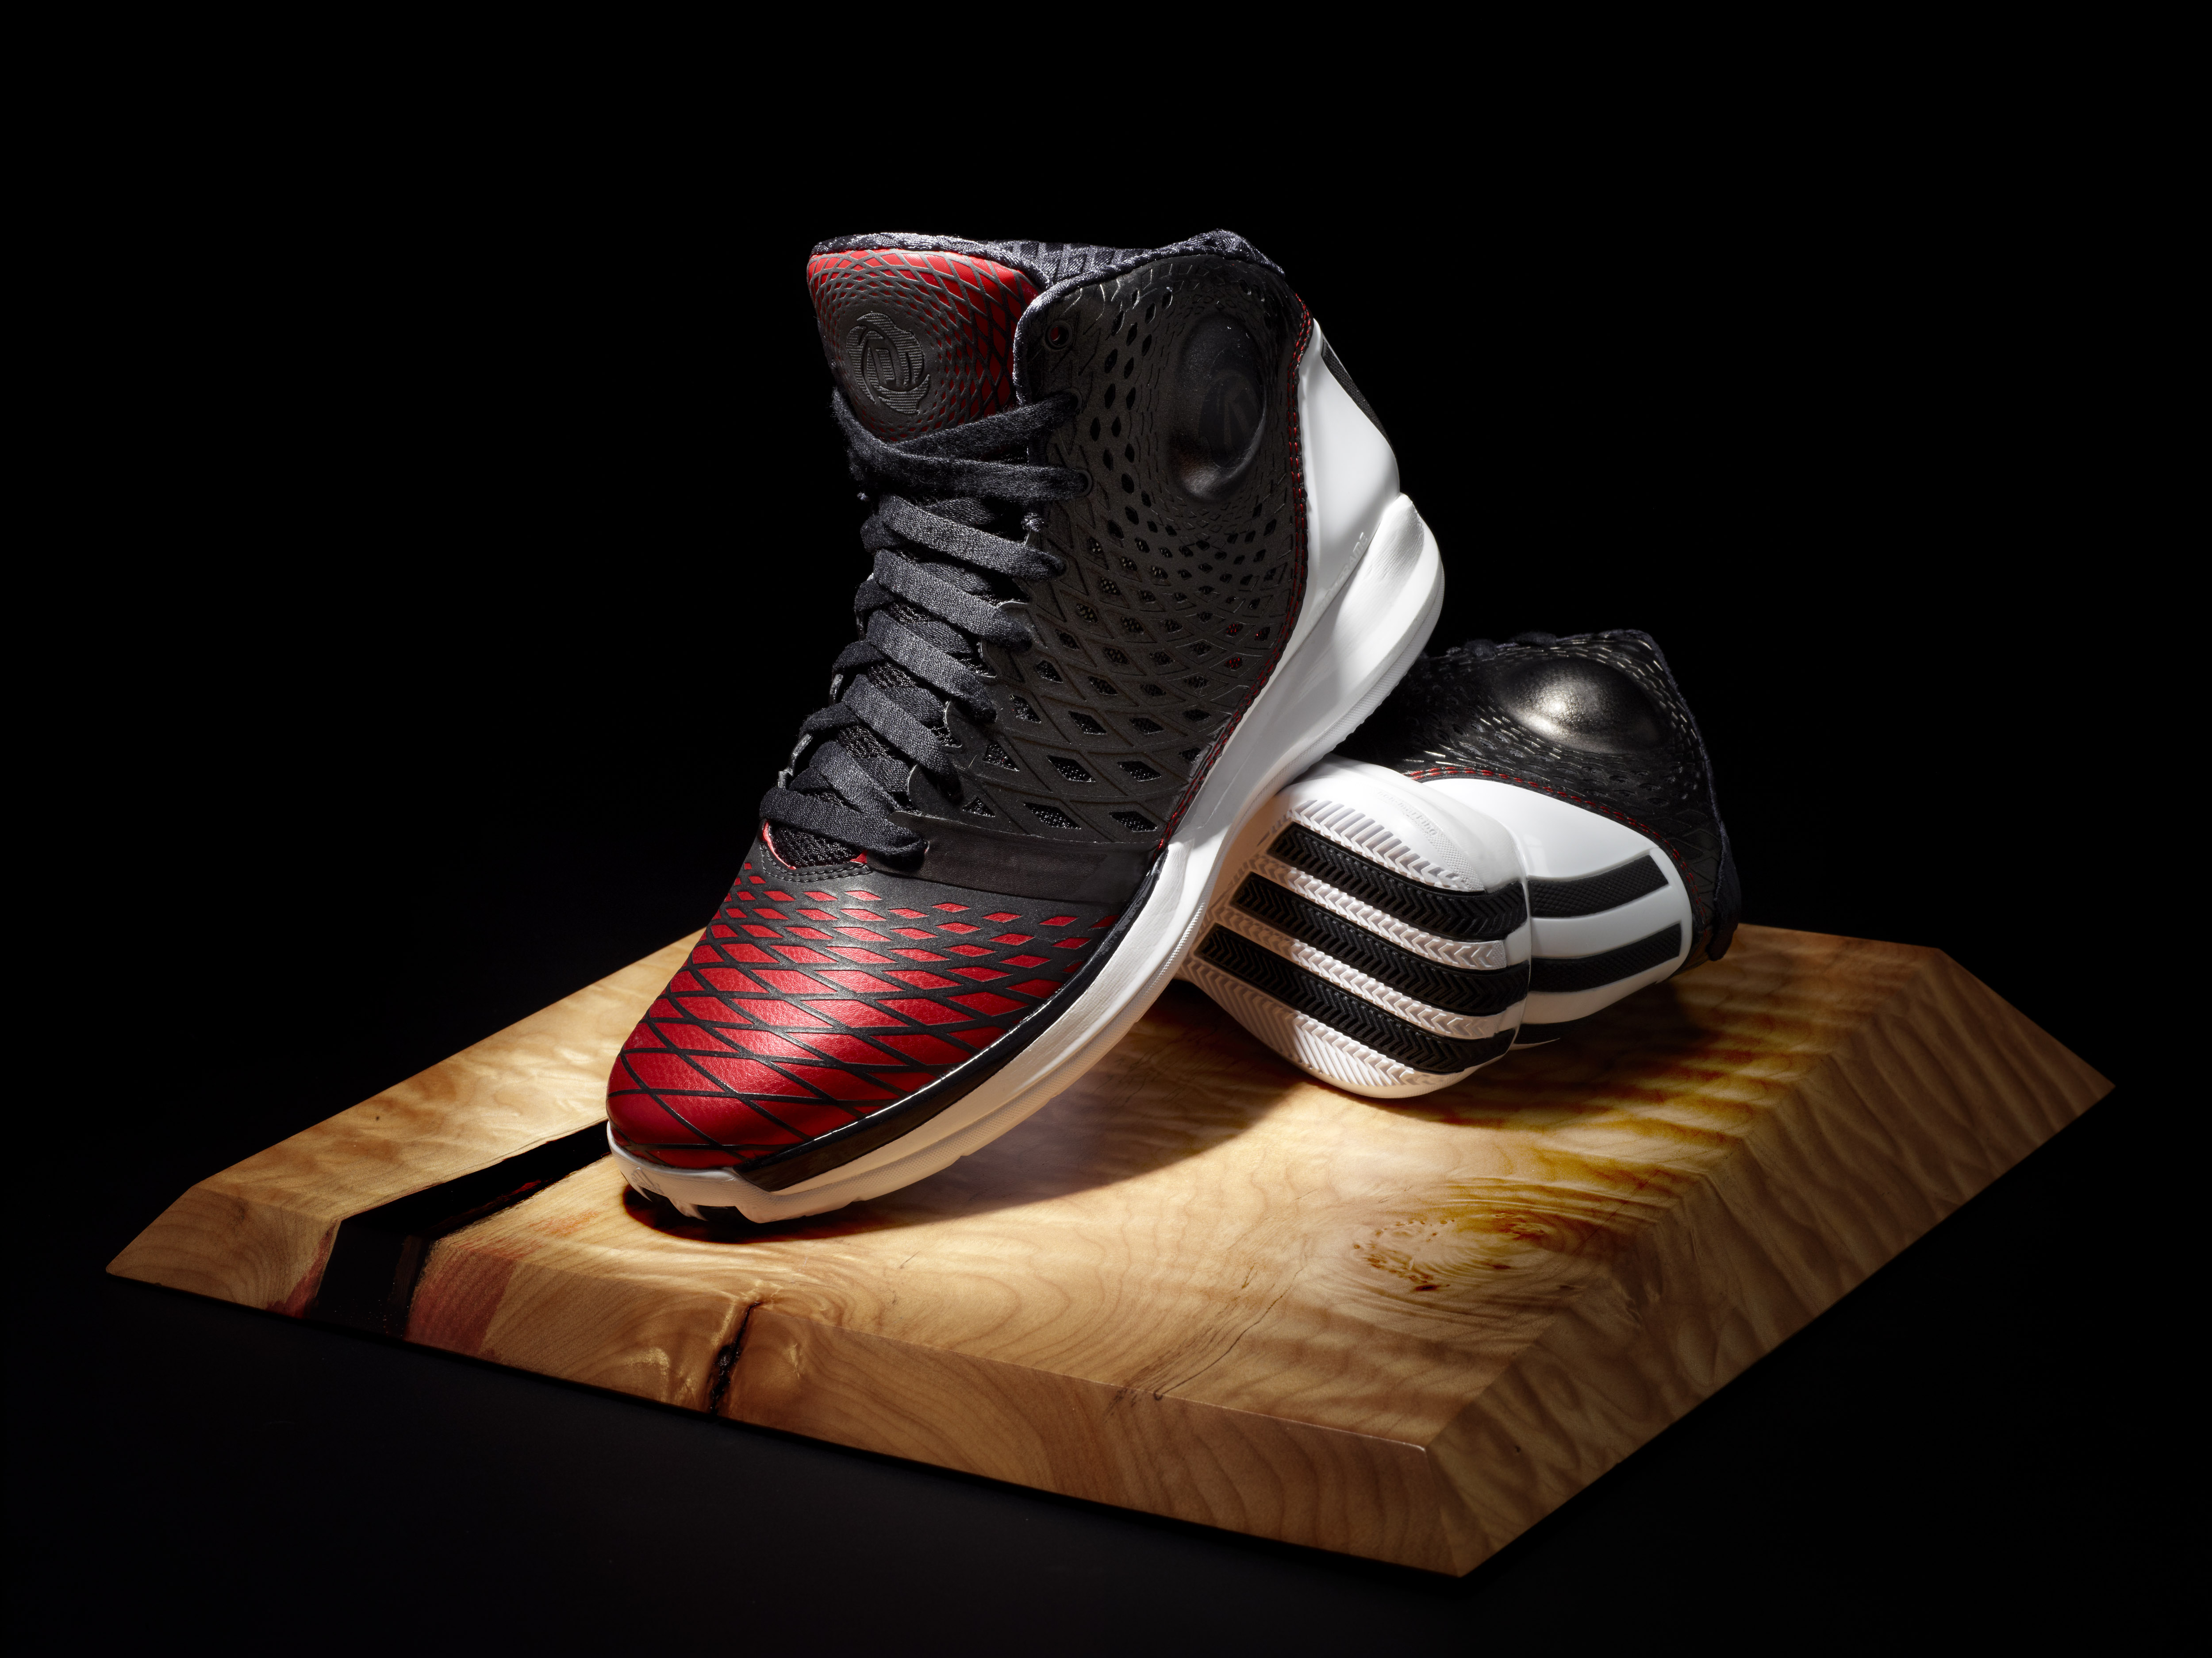 d rose 3.5 shoes price cheap online